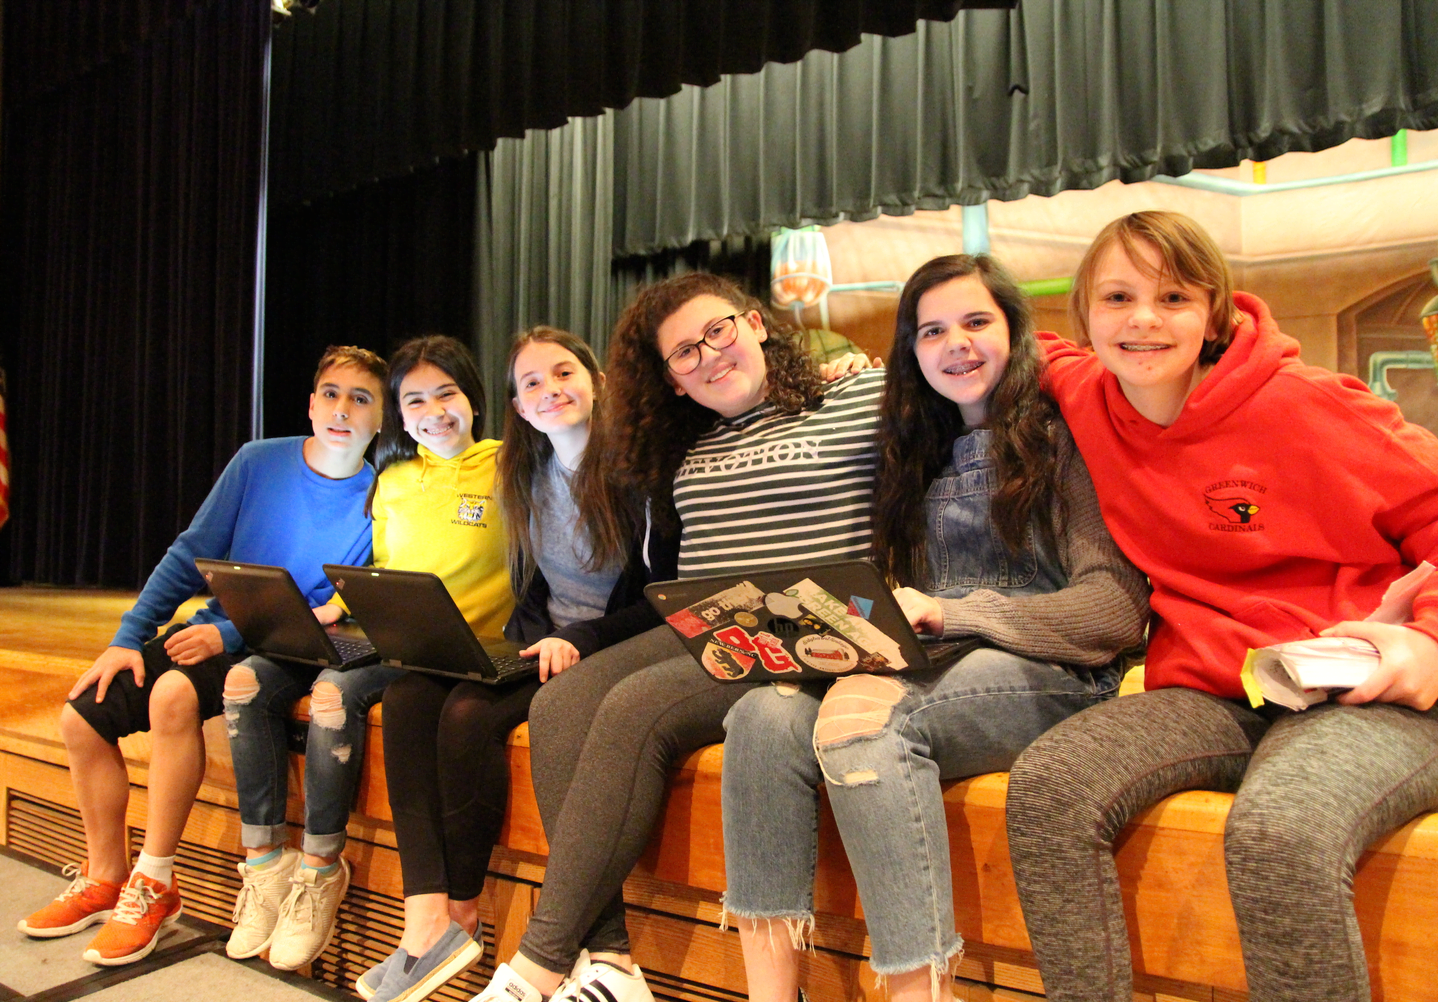 Western Middle School theater program will perform Willy Wonka Jr on March 29 and March 30. Photo: Leslie Yager